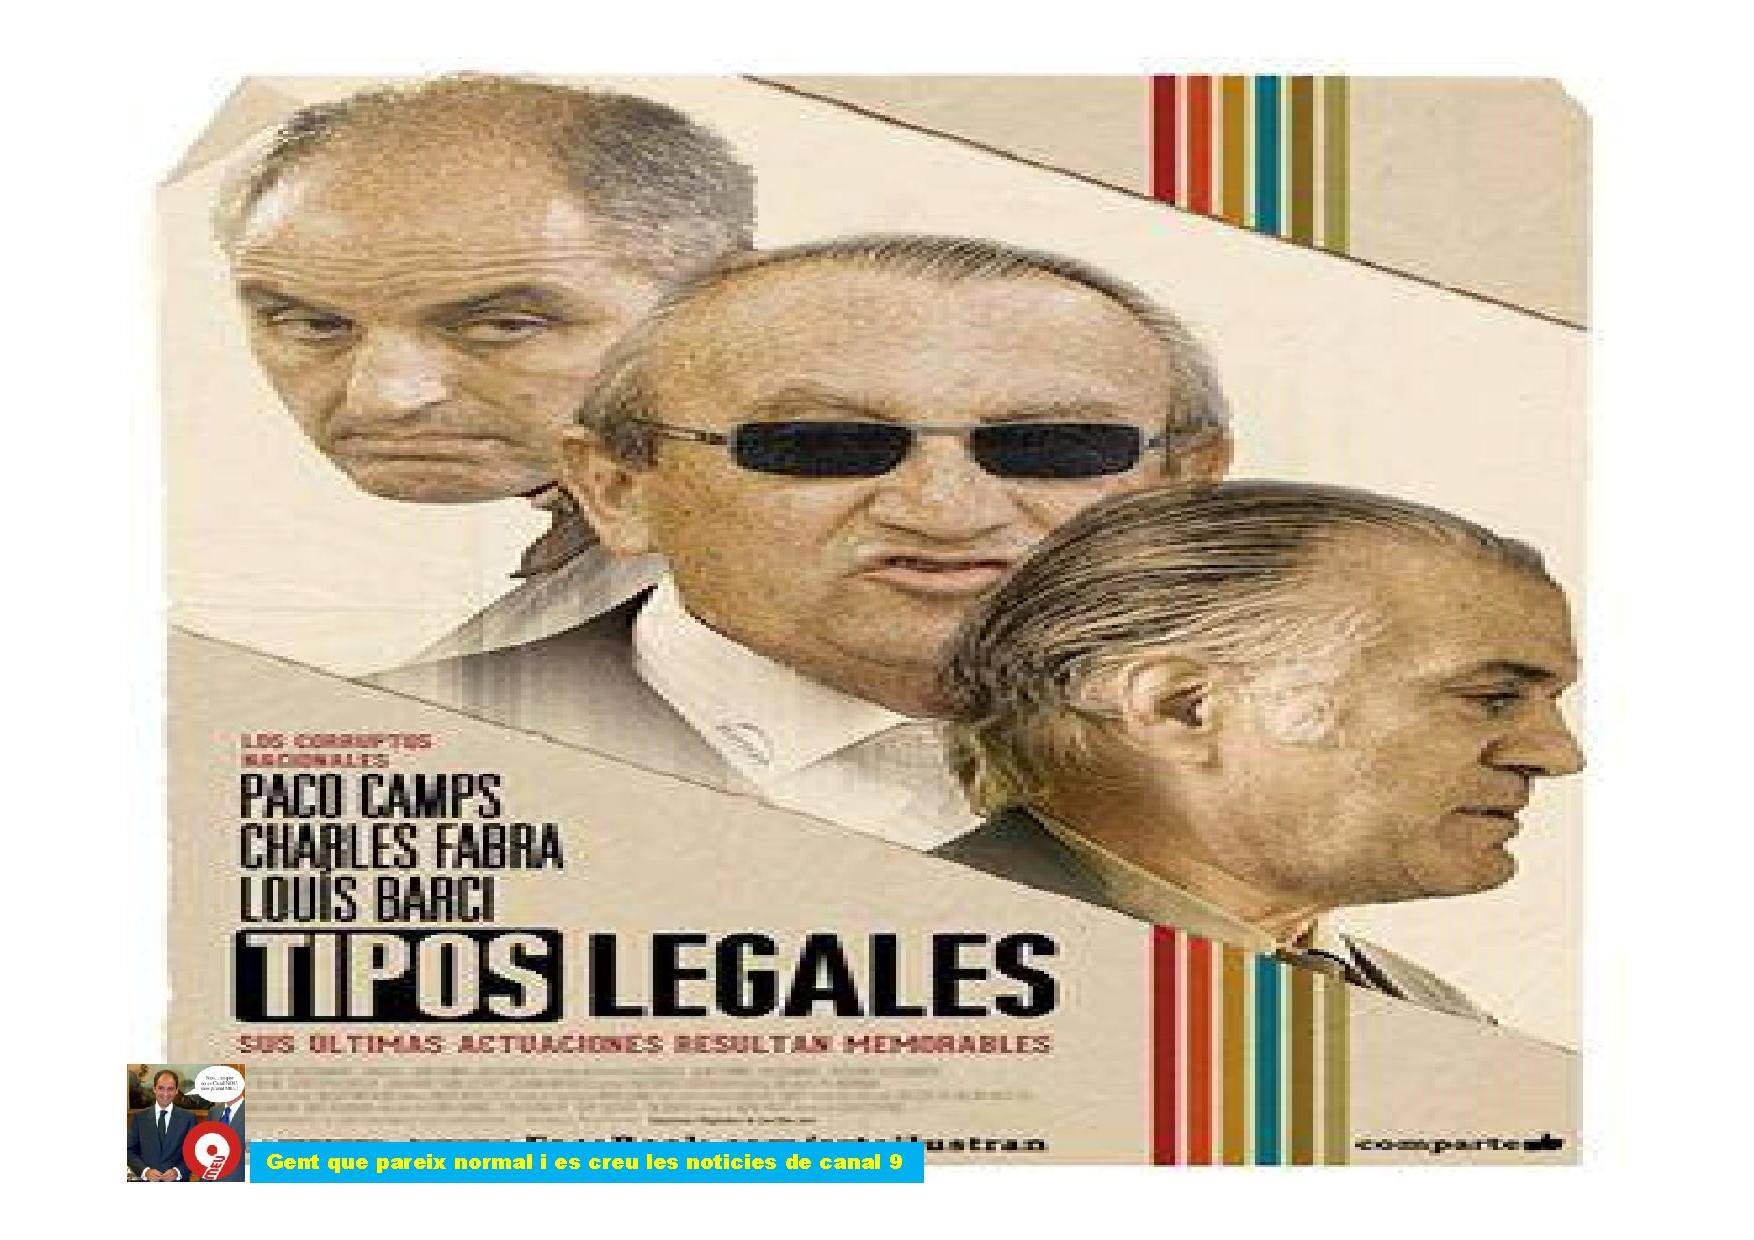 Tipos legales